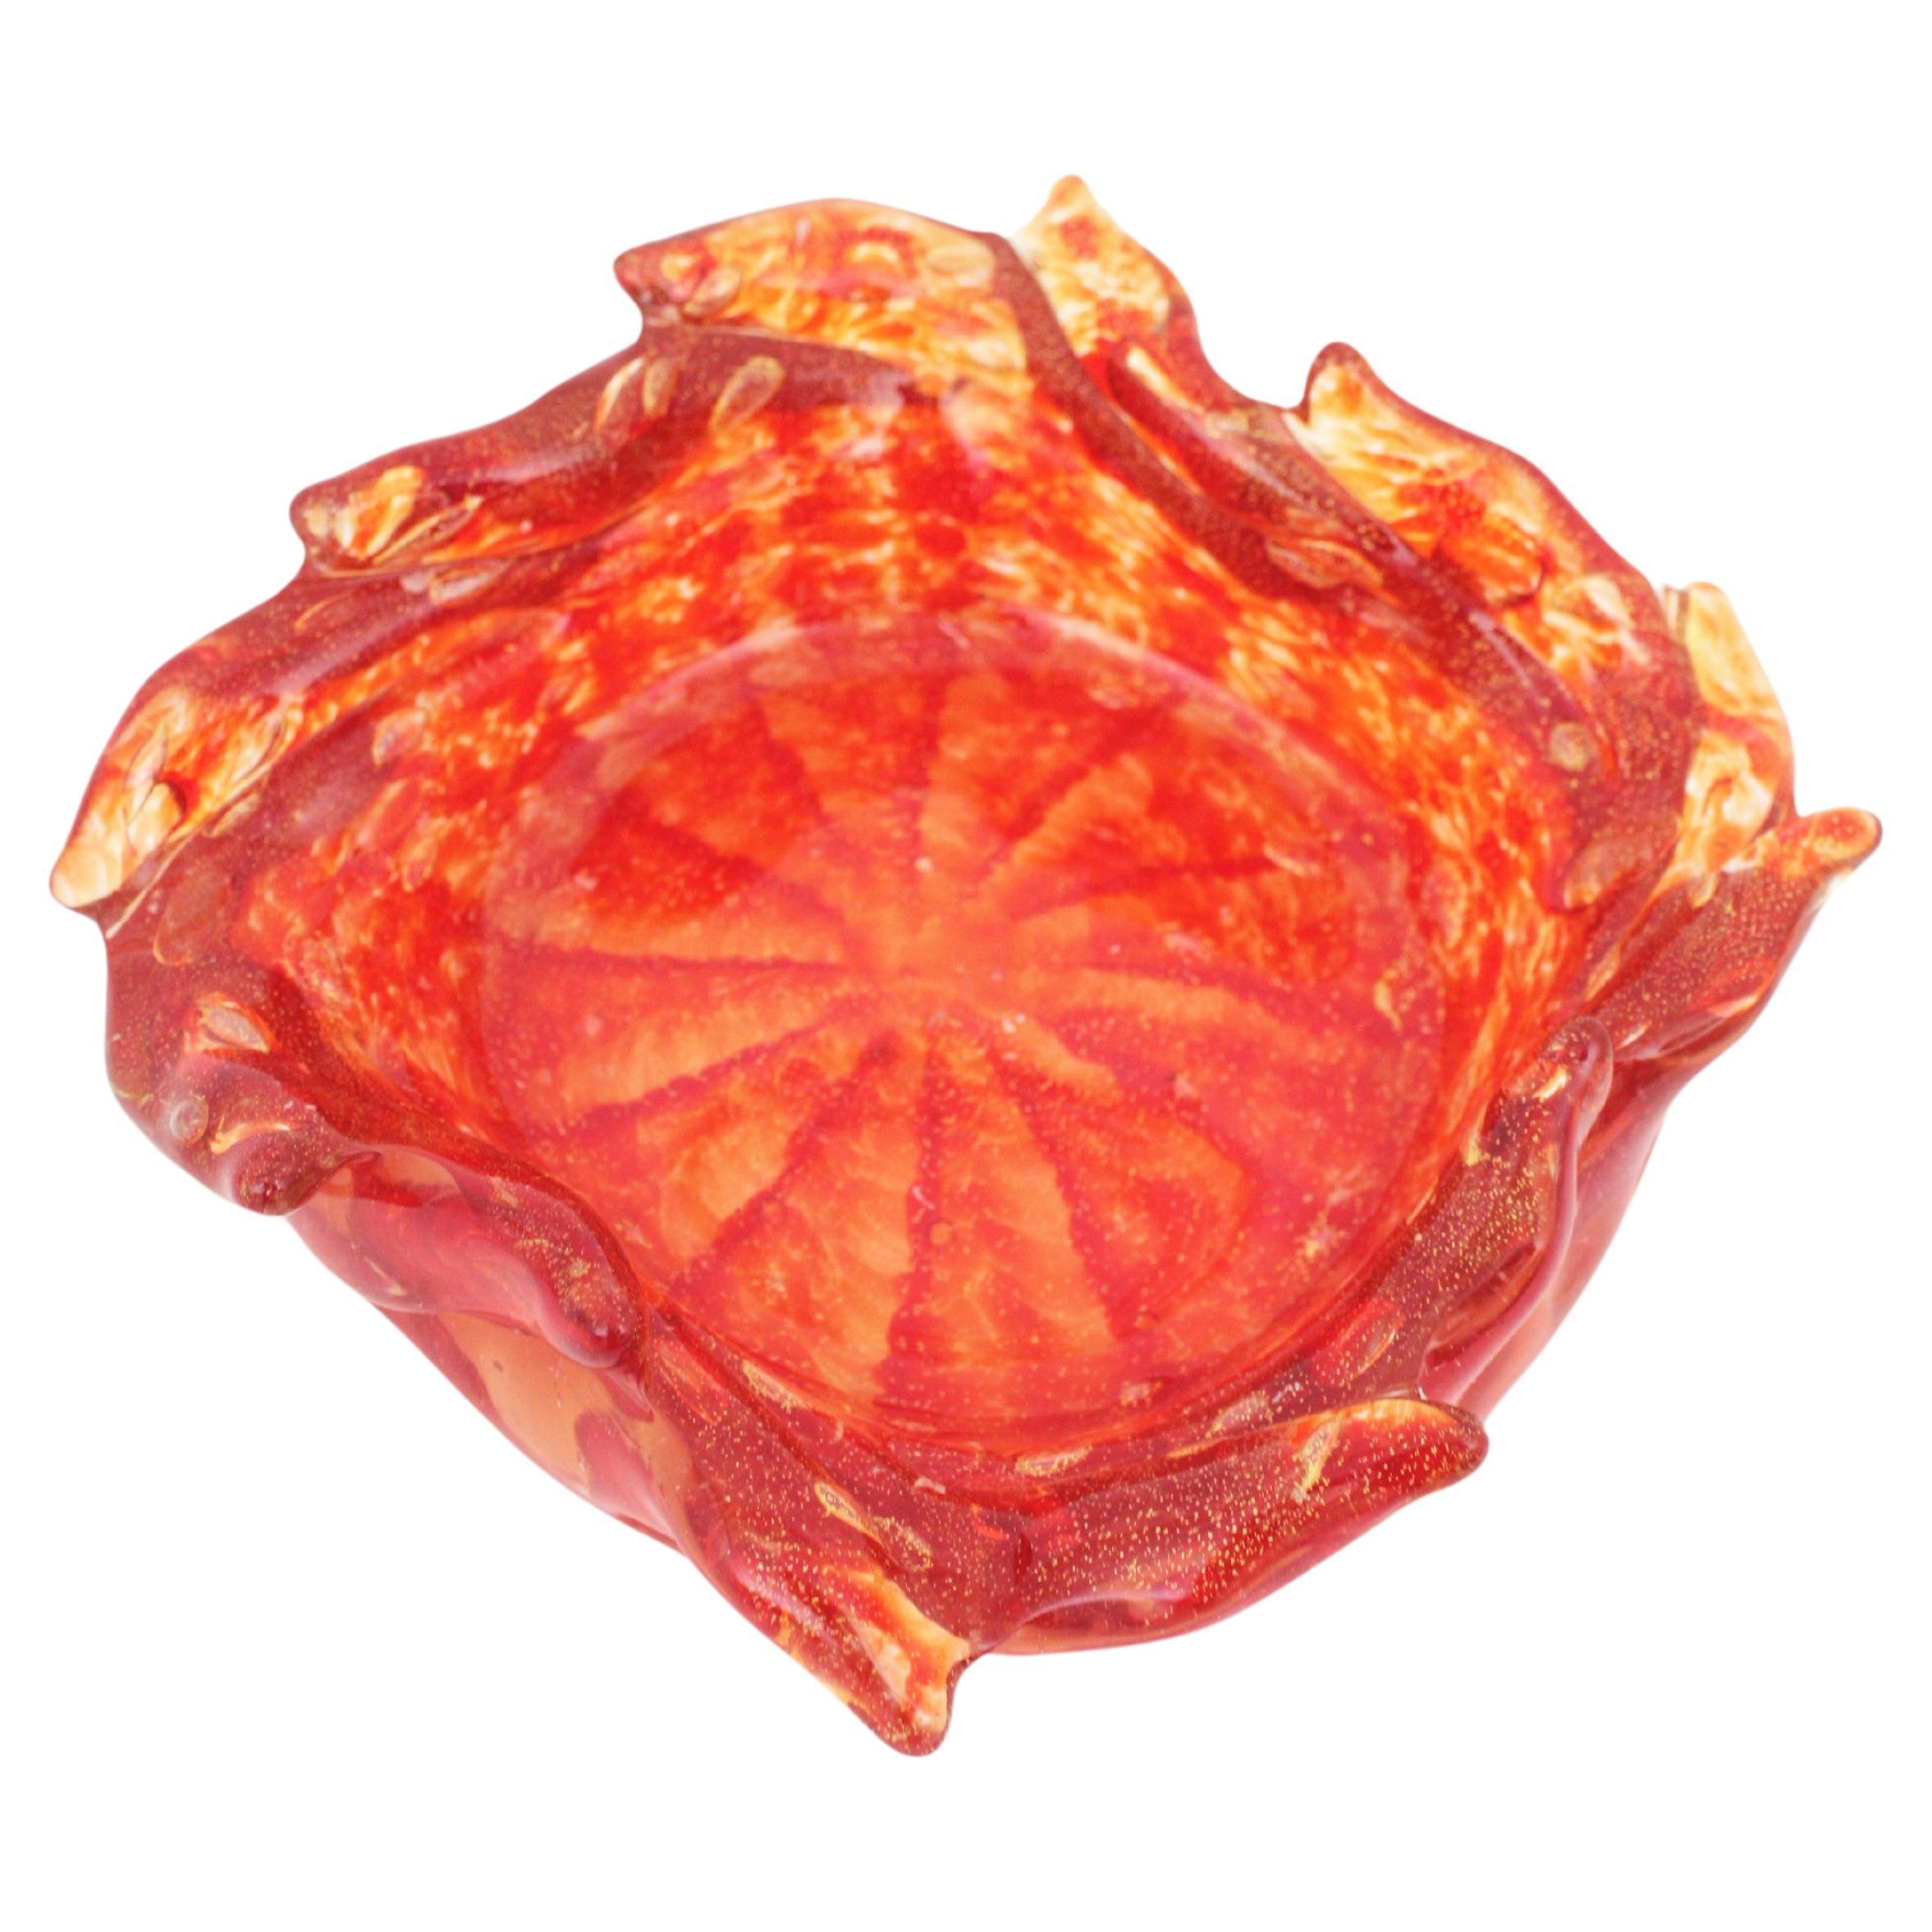 Eye-atching Murano glass bowl in vibrant red and shades of orange. Attributed to Barovier e Toso, Italy, 1950s.
It has a beautiful stripped decoration, controlled bubbles, aventurine gold dust and tornado shape. Exquisite hand blown art glass